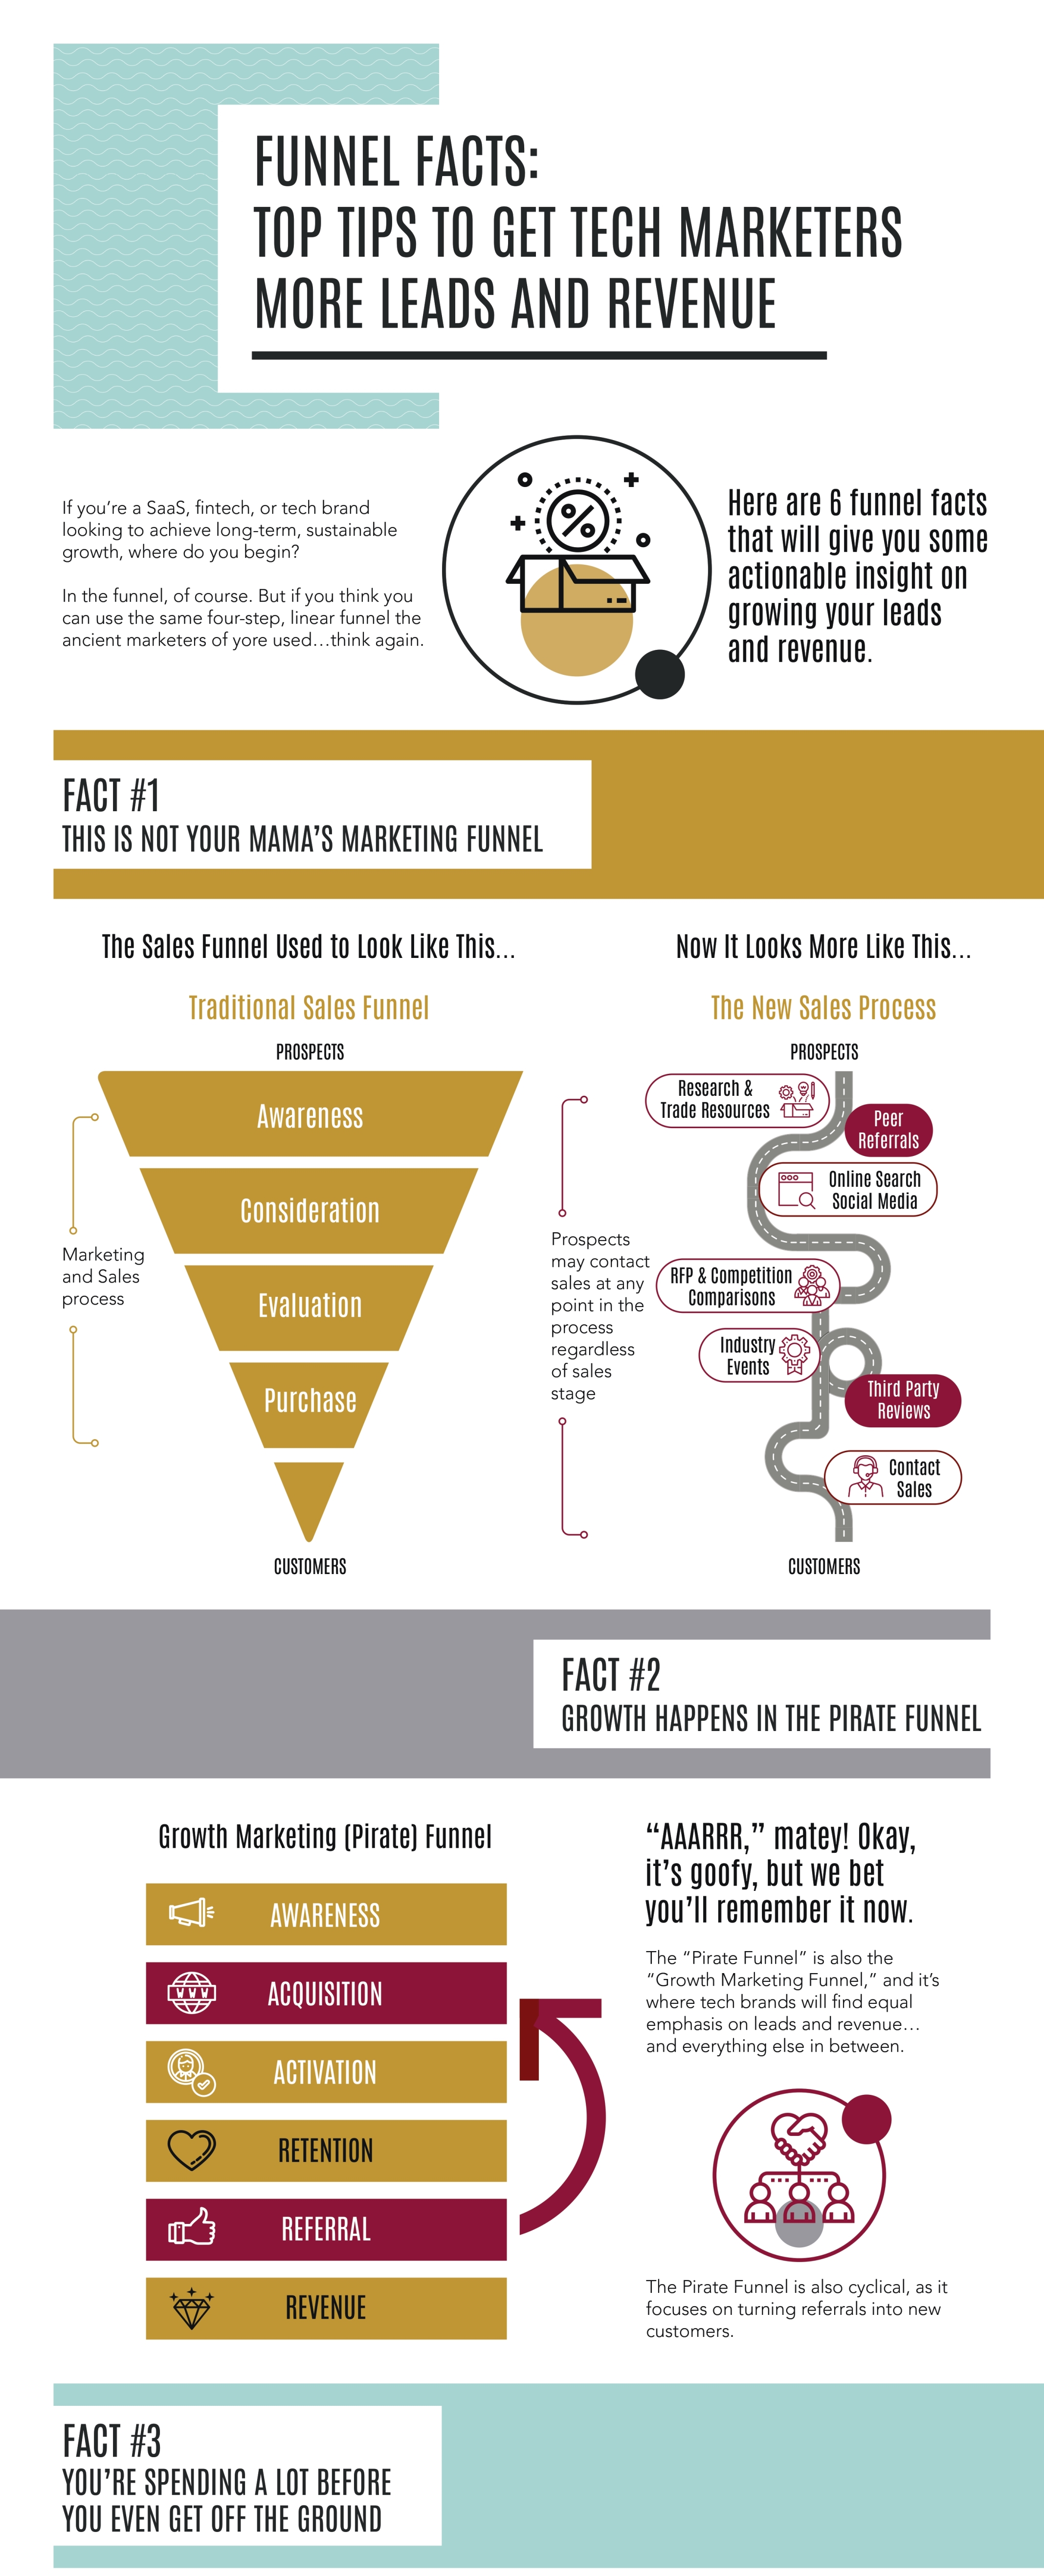 Growth Facts About The Tech Marketing Funnel